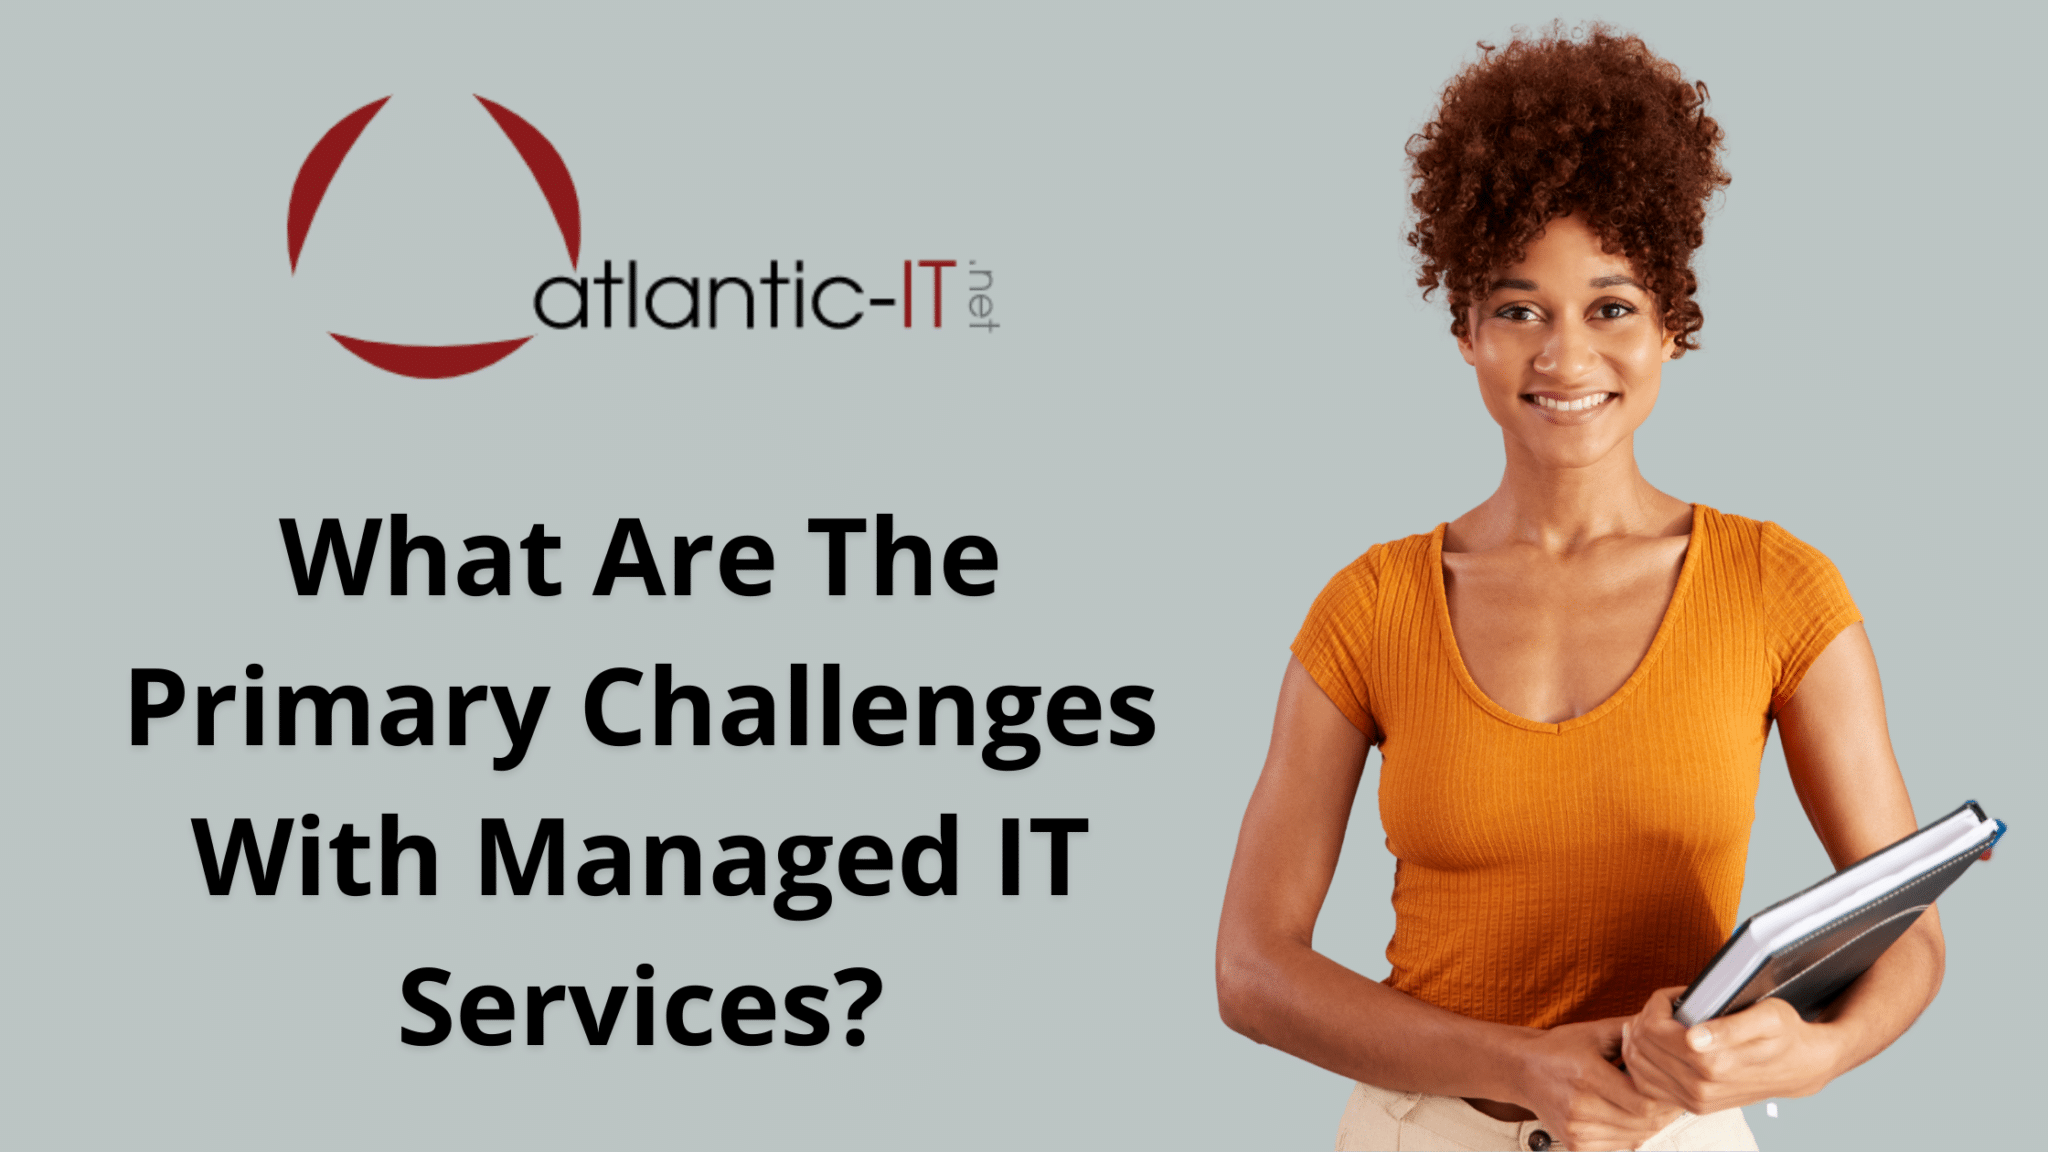 What Are The Primary Challenges With Managed IT Services?